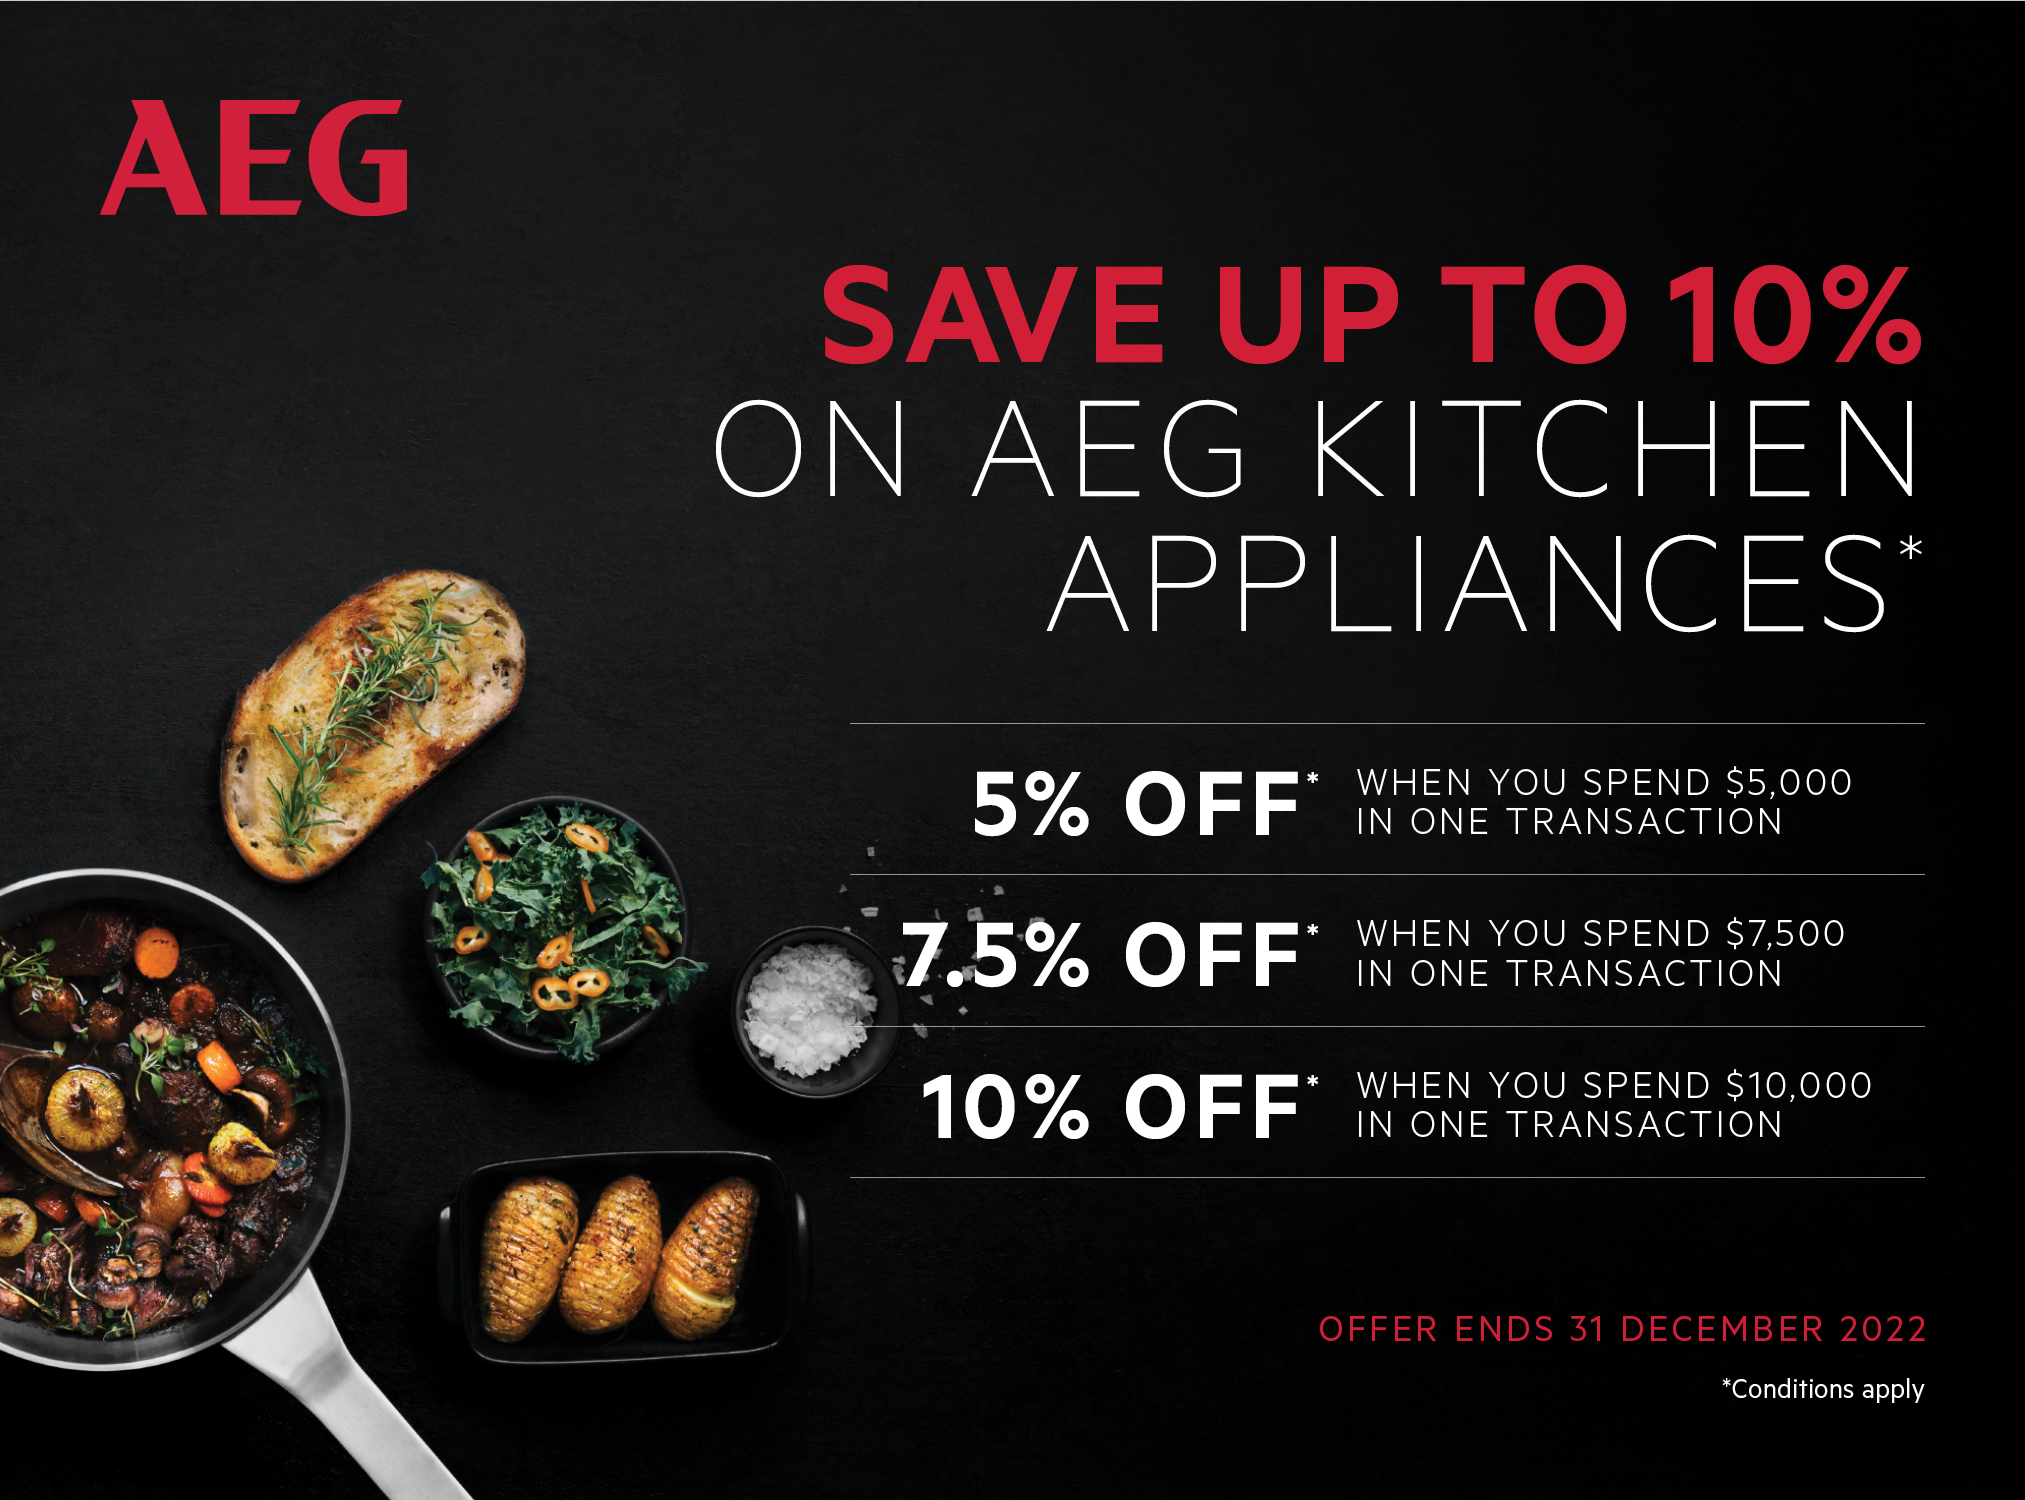 Save Up To 10%* On Participating AEG Kitchen Appliances